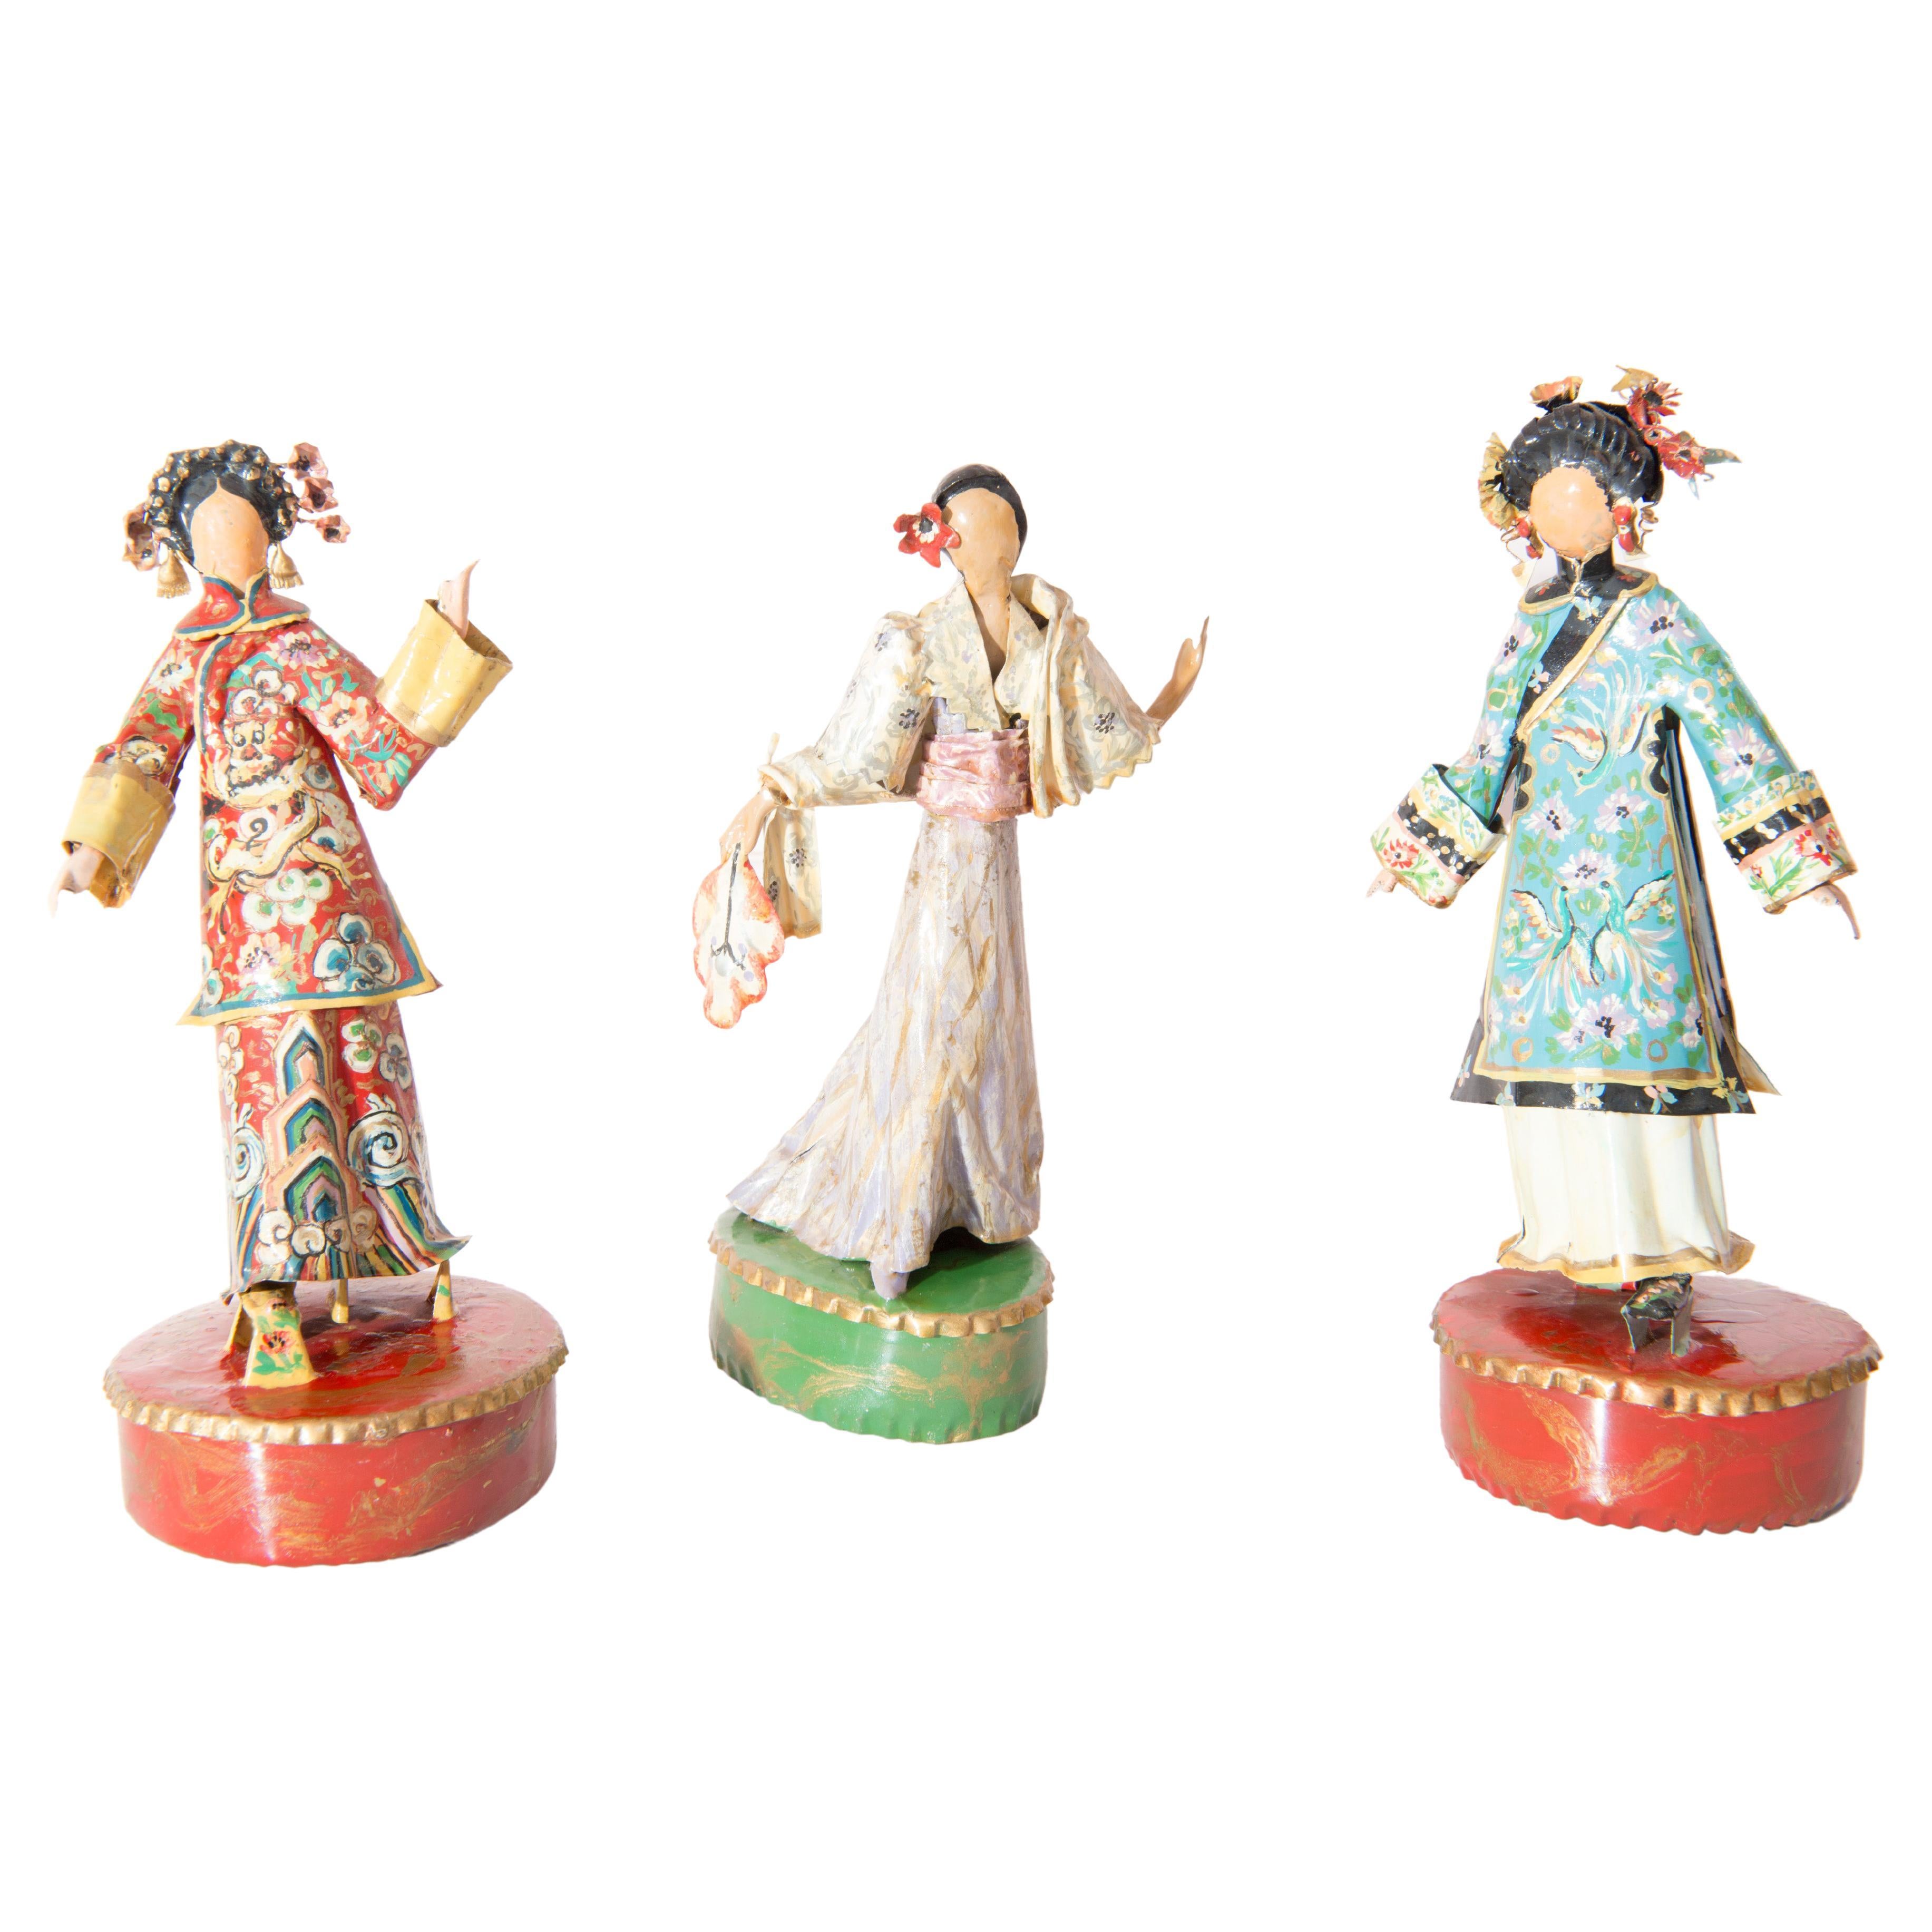 Trio of Asian Costumed Women Sculptures by Lee Menichetti